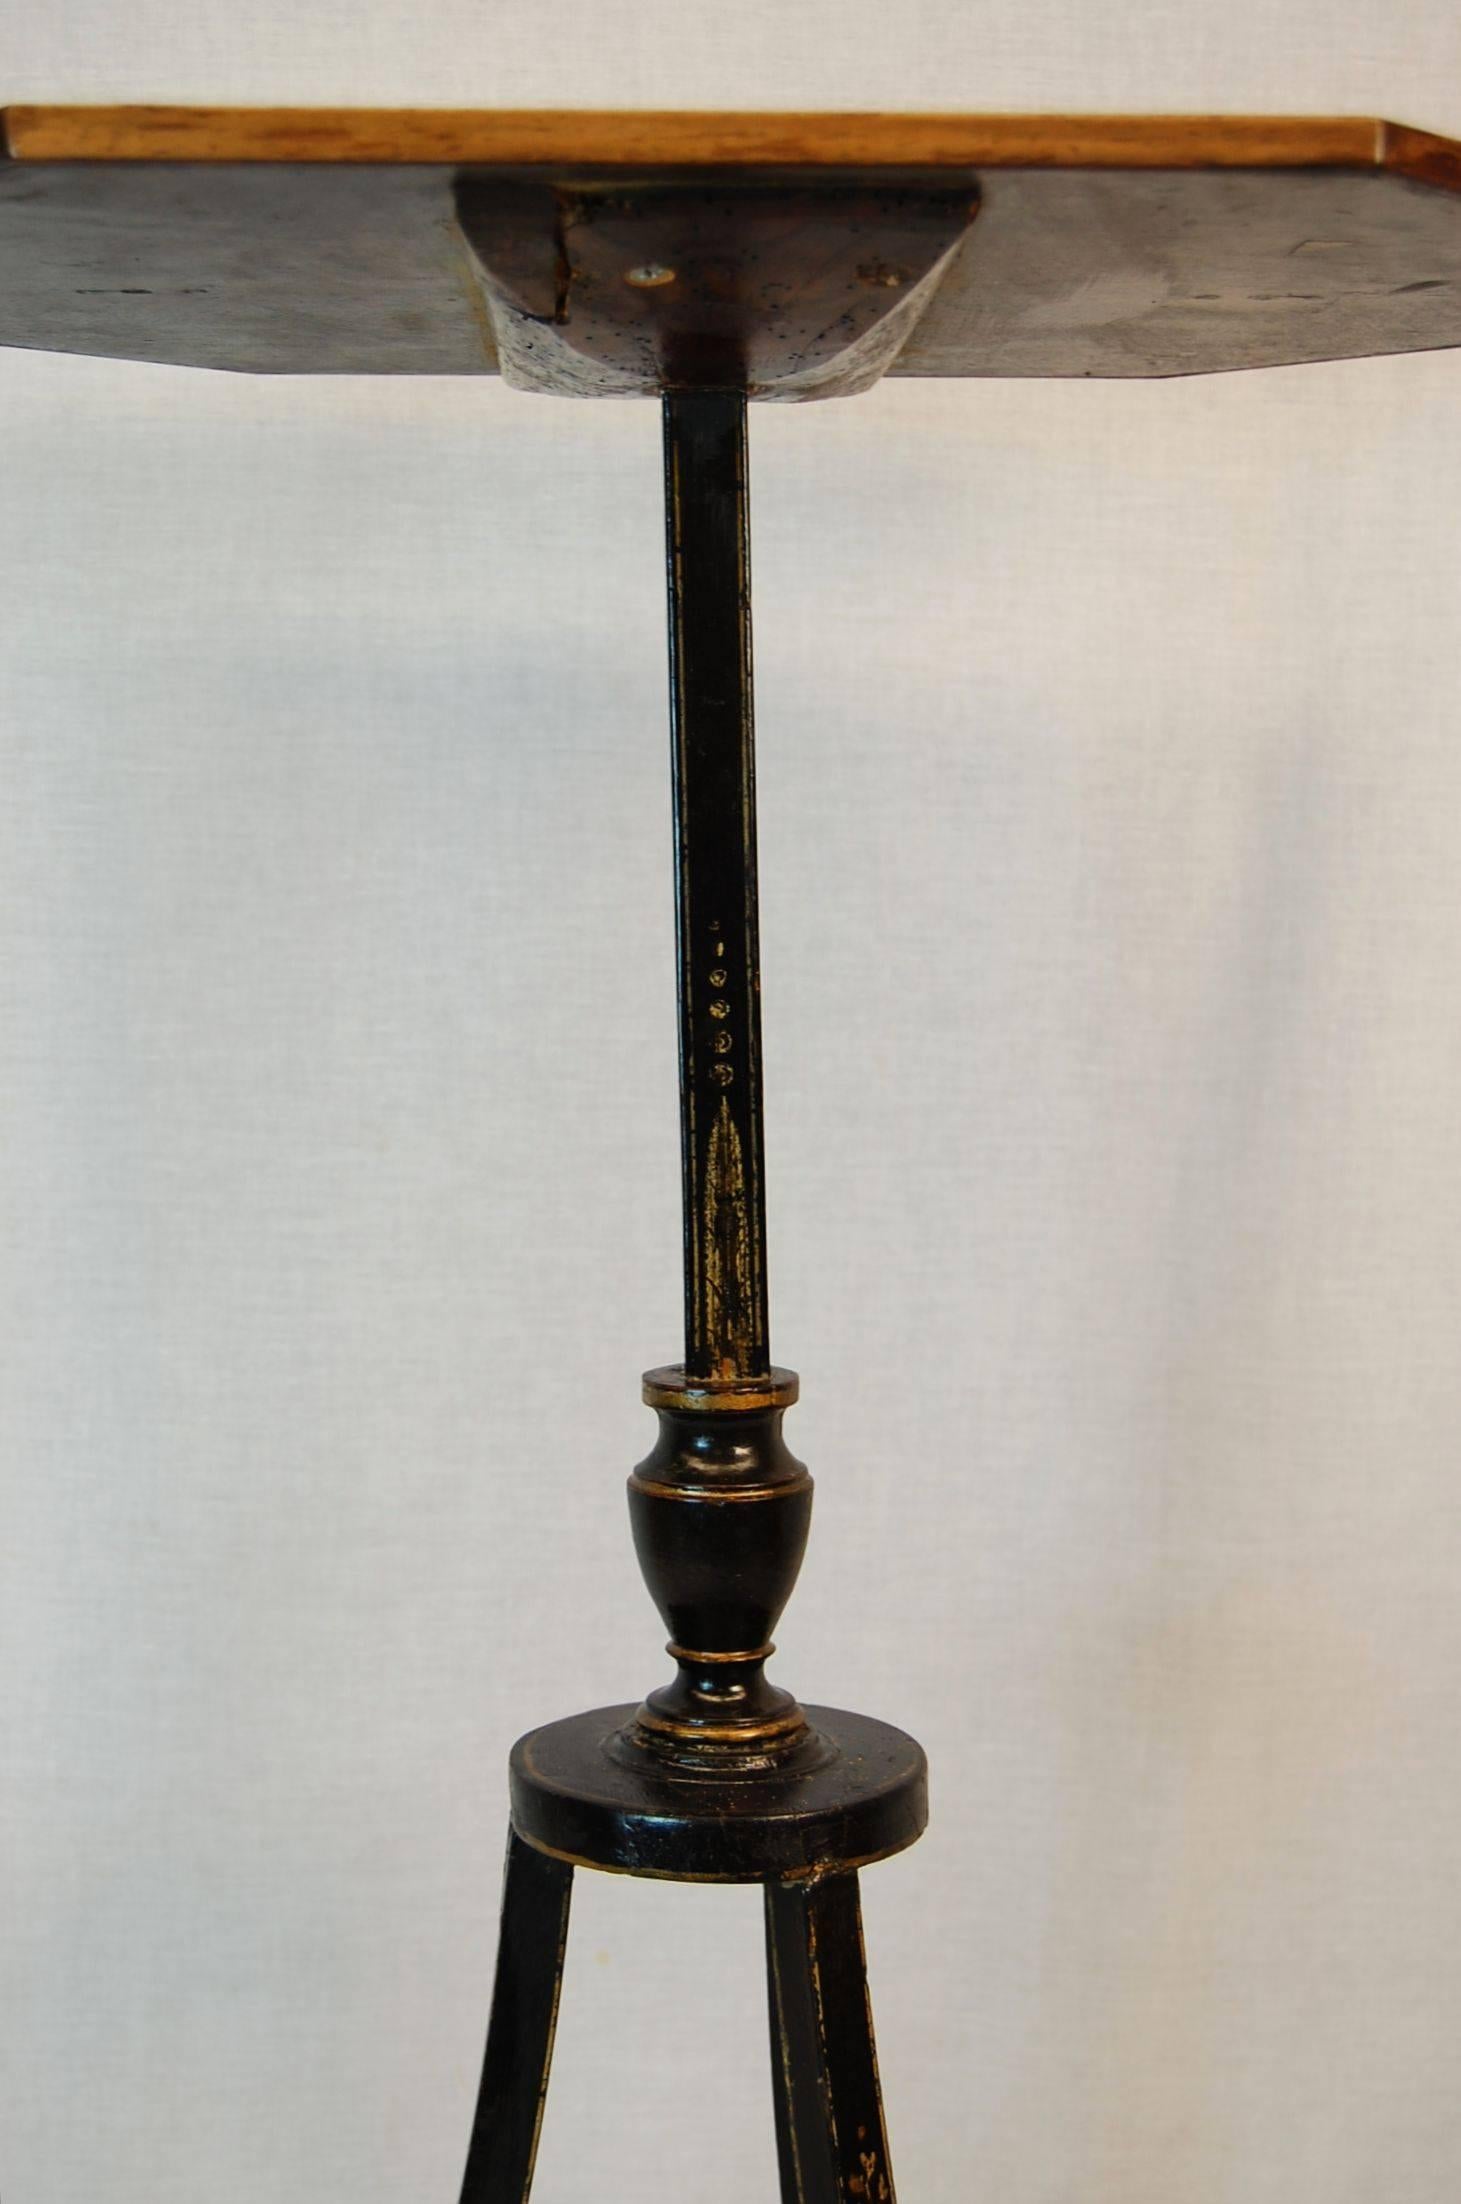 English Hepplewhite Pedestal Candle Stand circa 1800, Black Lacquered Base In Good Condition For Sale In Pittsburgh, PA